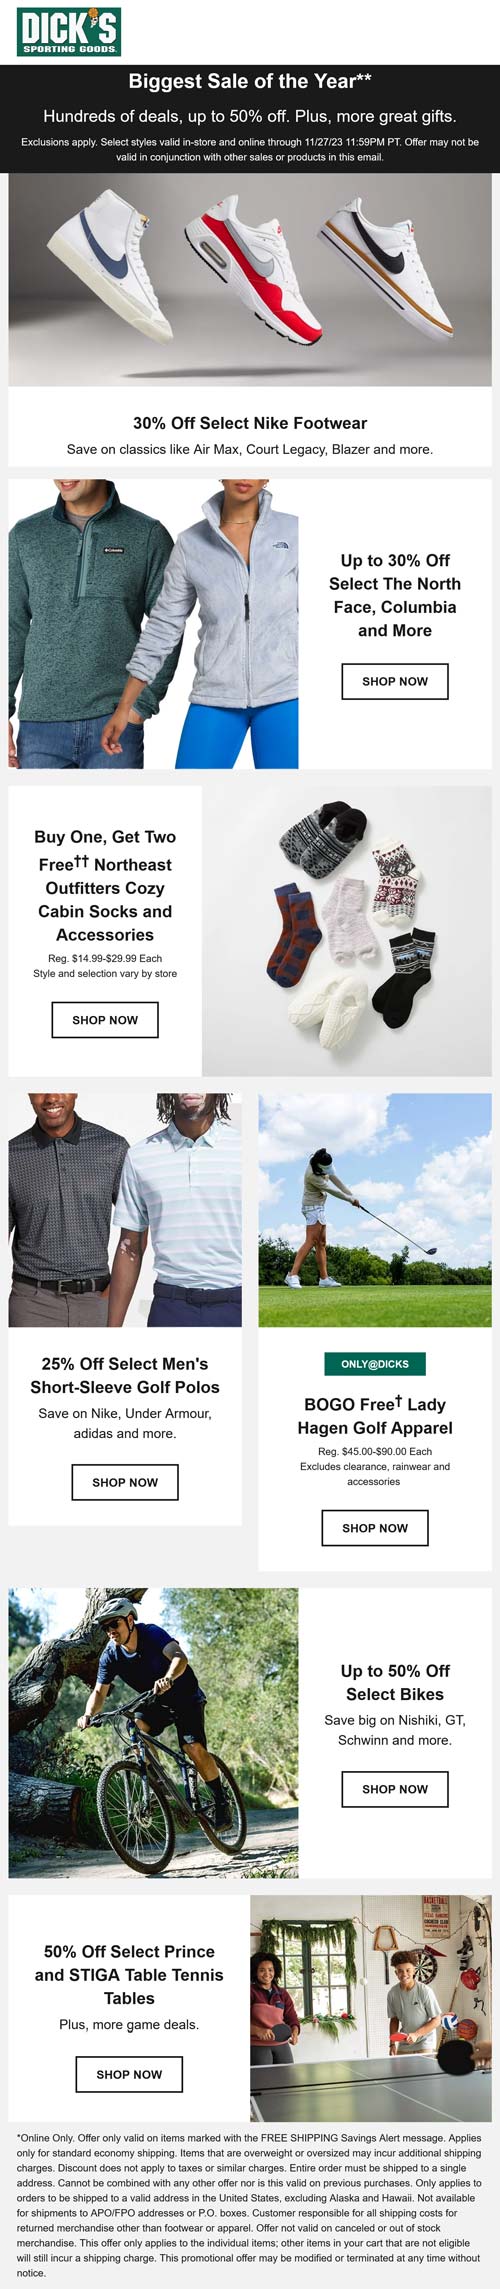 Dicks stores Coupon  30% off Nike shoes, 50% off bikes, bogo golf apparel & more today at Dicks sporting goods #dicks 